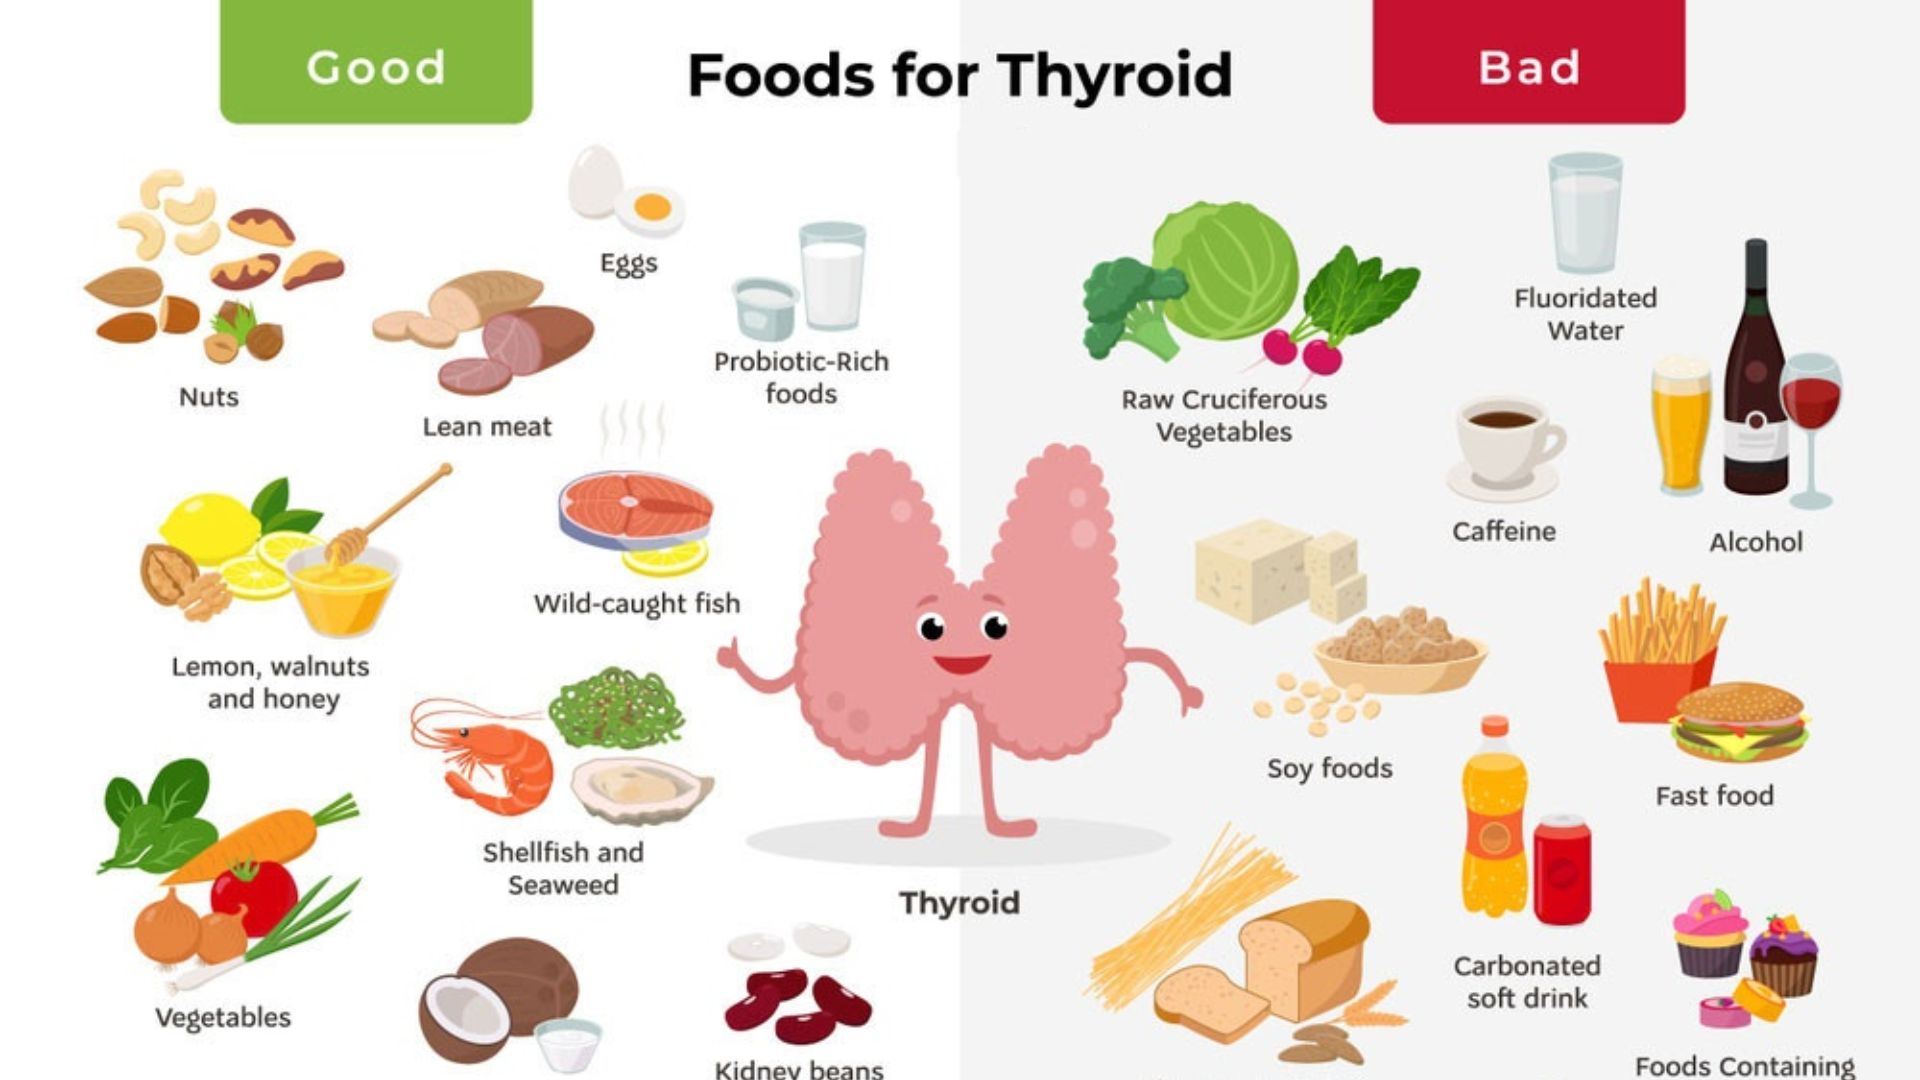 Thyroid Health and Nutrition: Foods to Support Thyroid Function